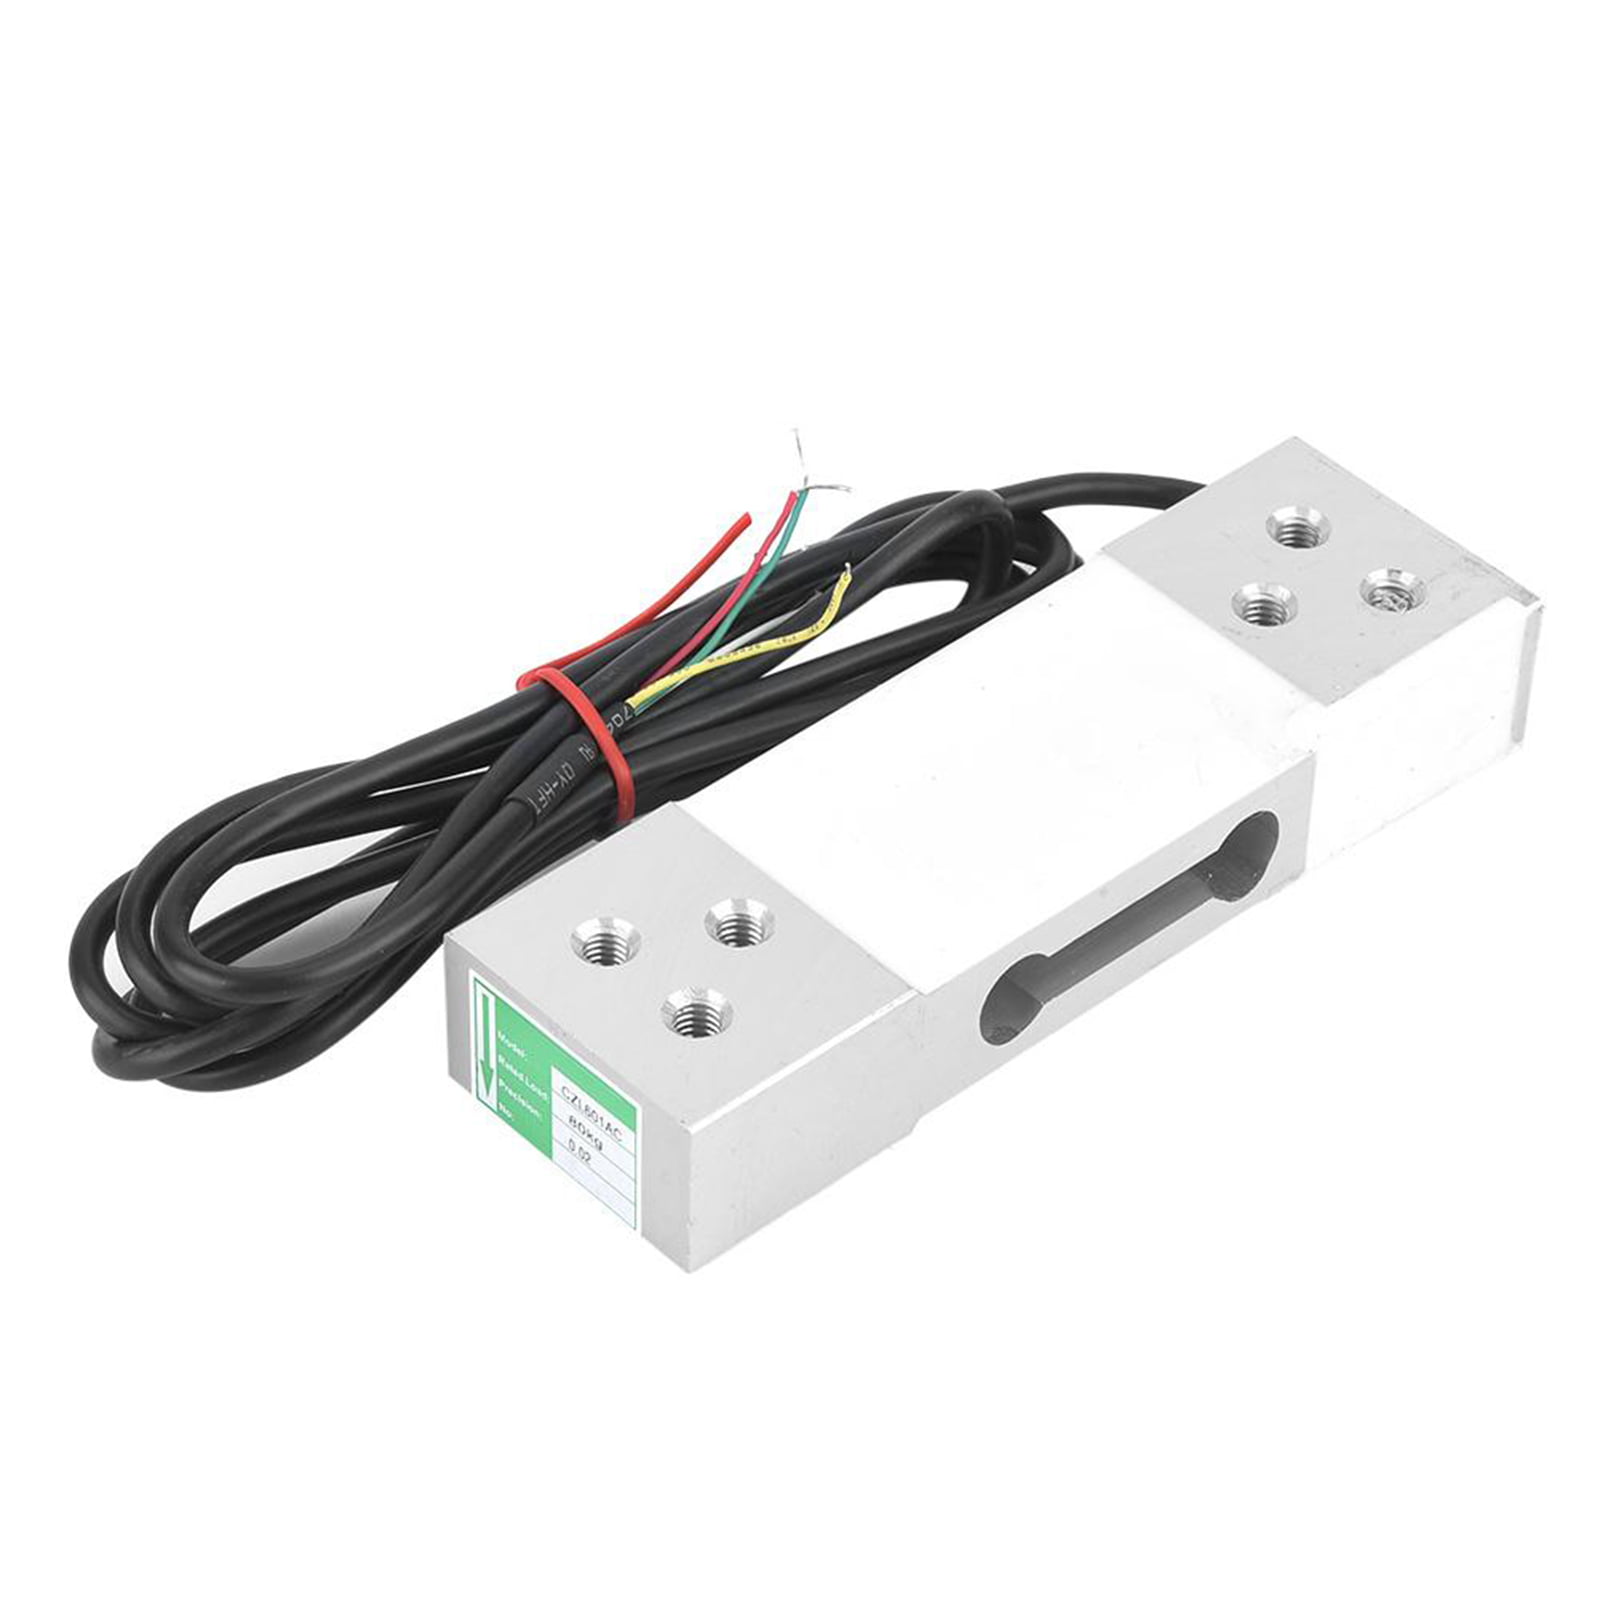 Parallel Beam Load Cell Sensor 50kg/110lb Weighing Sensor with Shielding Cable 